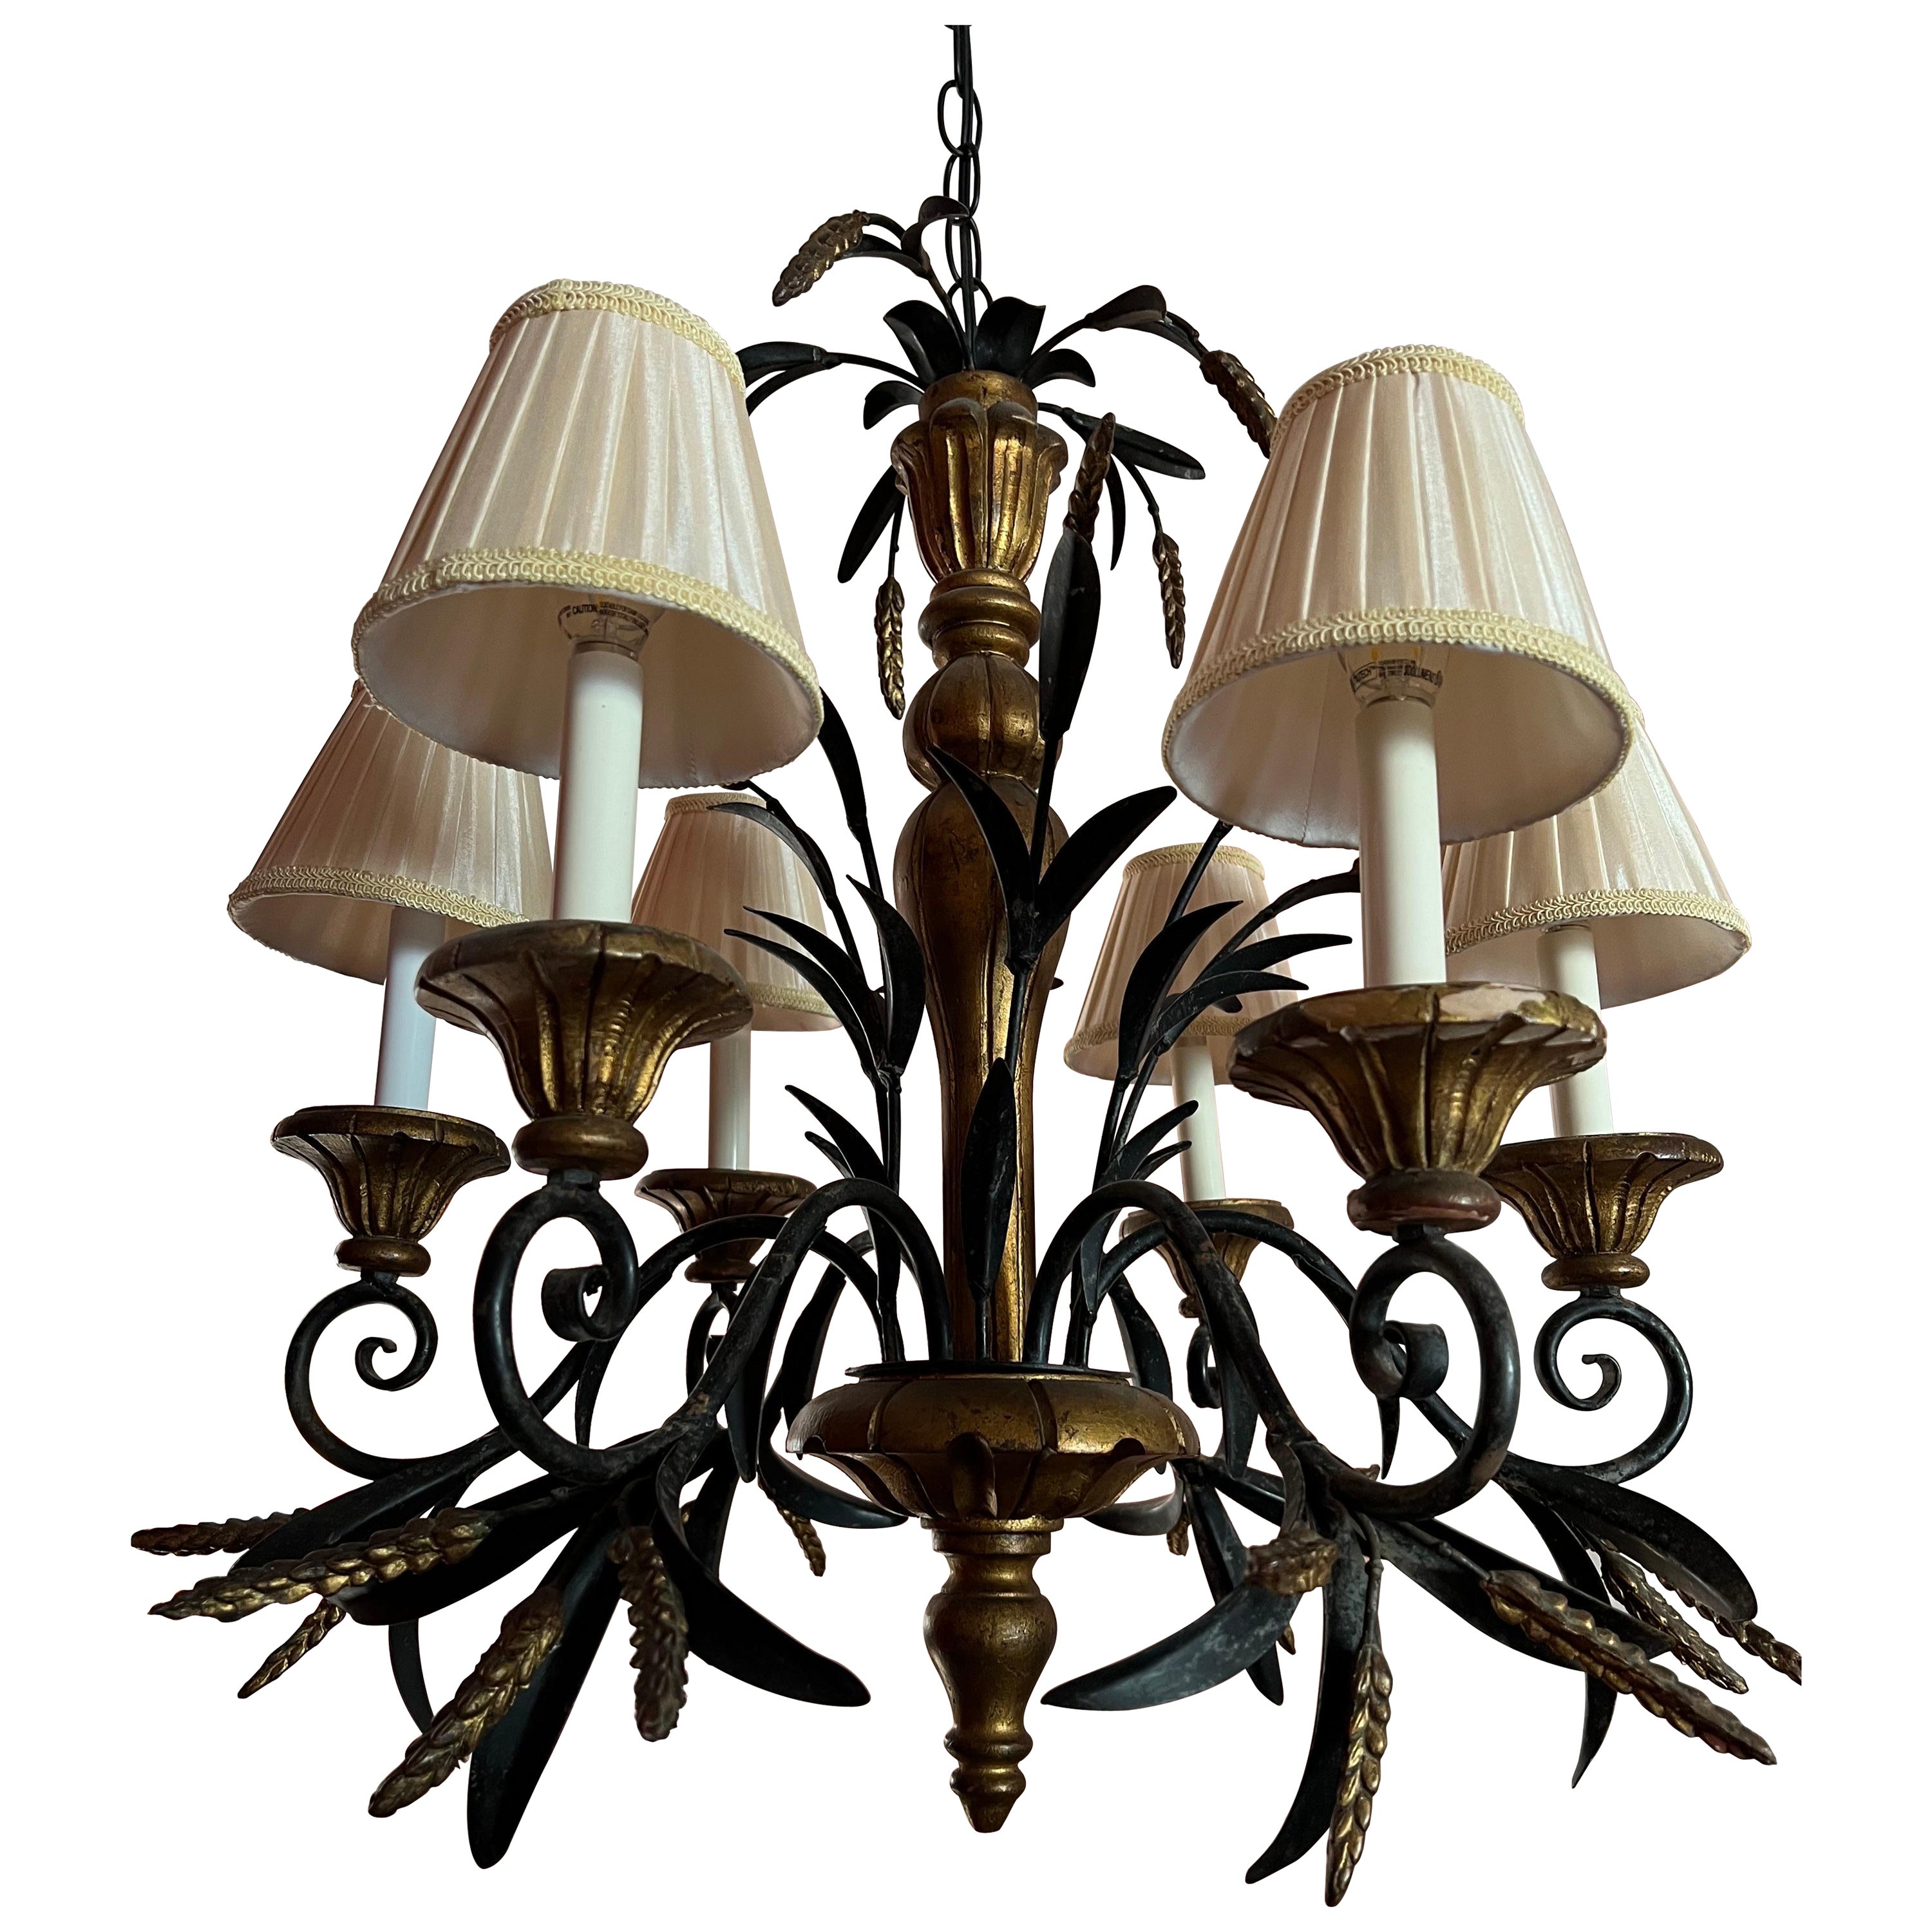 Tole Wheat Sheaf Chandelier in the style of Currey and Company